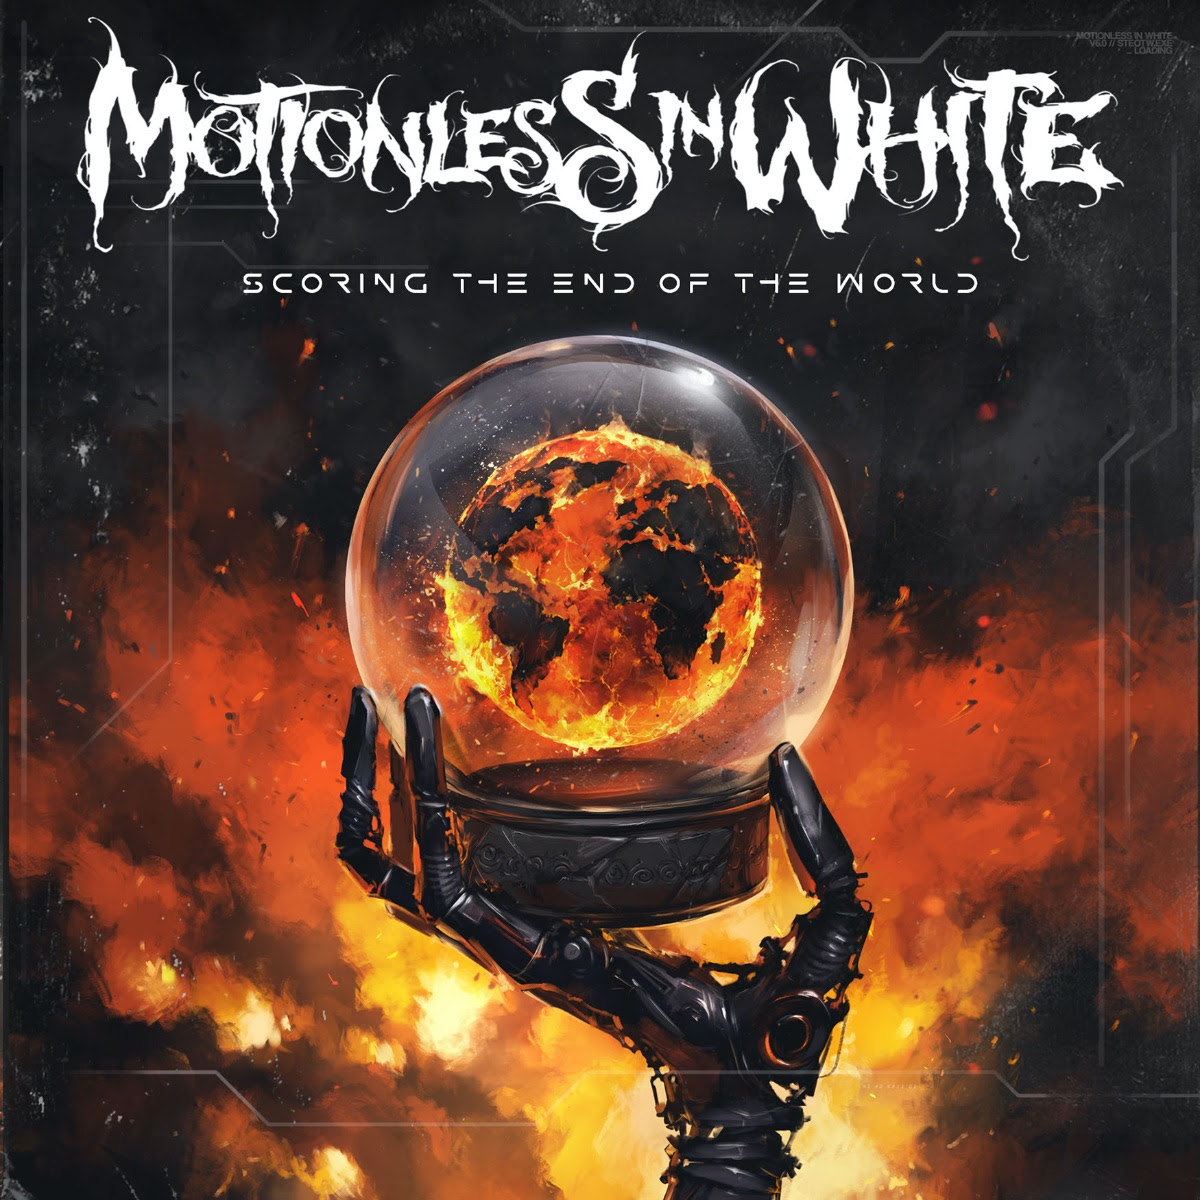 Motionless in White - Scoring the End of the World DOWNLOAD FULL ALBUM  [ZIP FILE]